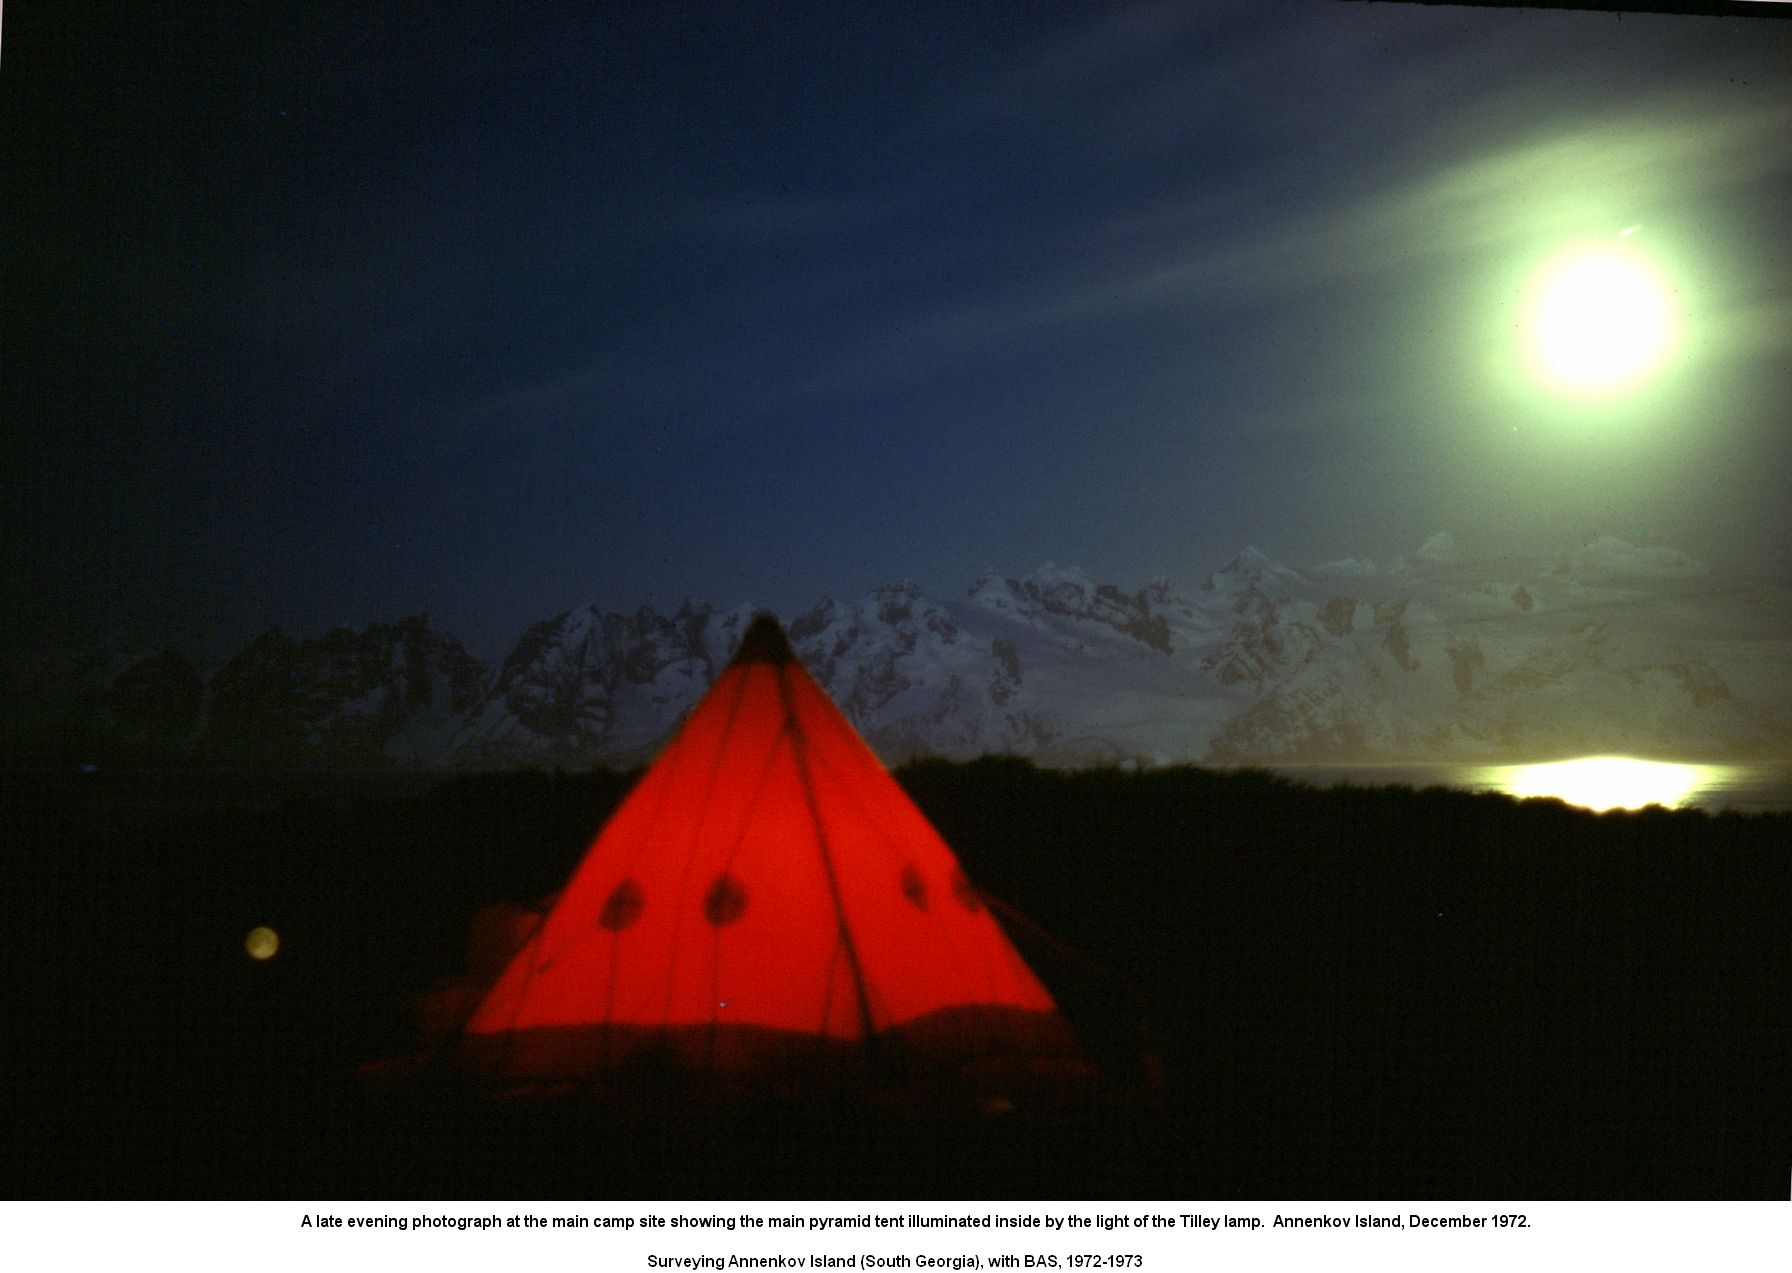 A late evening photograph at the main camp site showing the main pyramid tent illuminated inside by the light of the Tilley lamp.  Annenkov Island, December 1972.